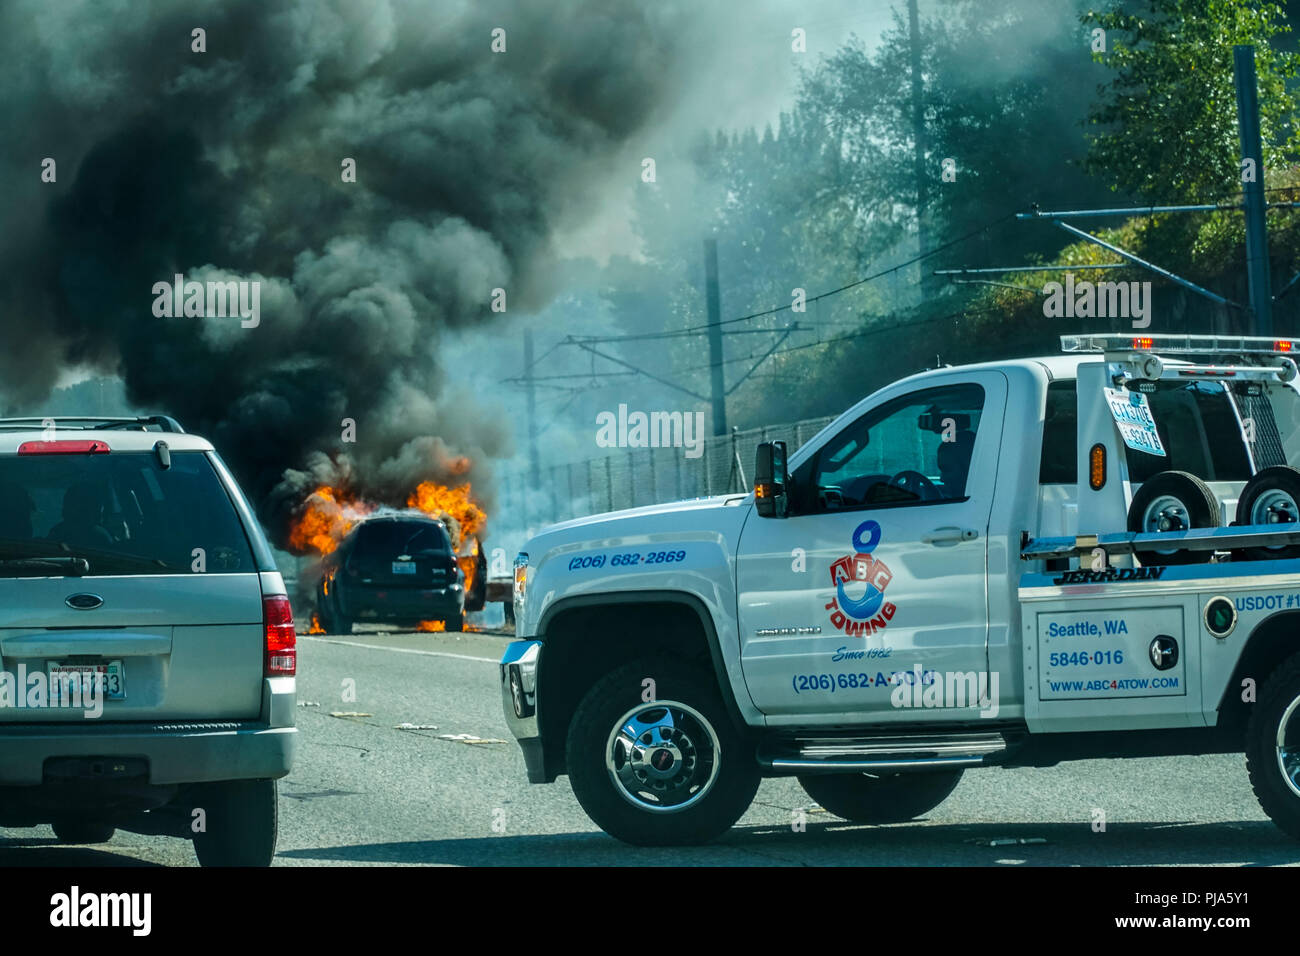 A Chevy HSR on fire on Interstate 5 in Seattle Washington USA Stock Photo